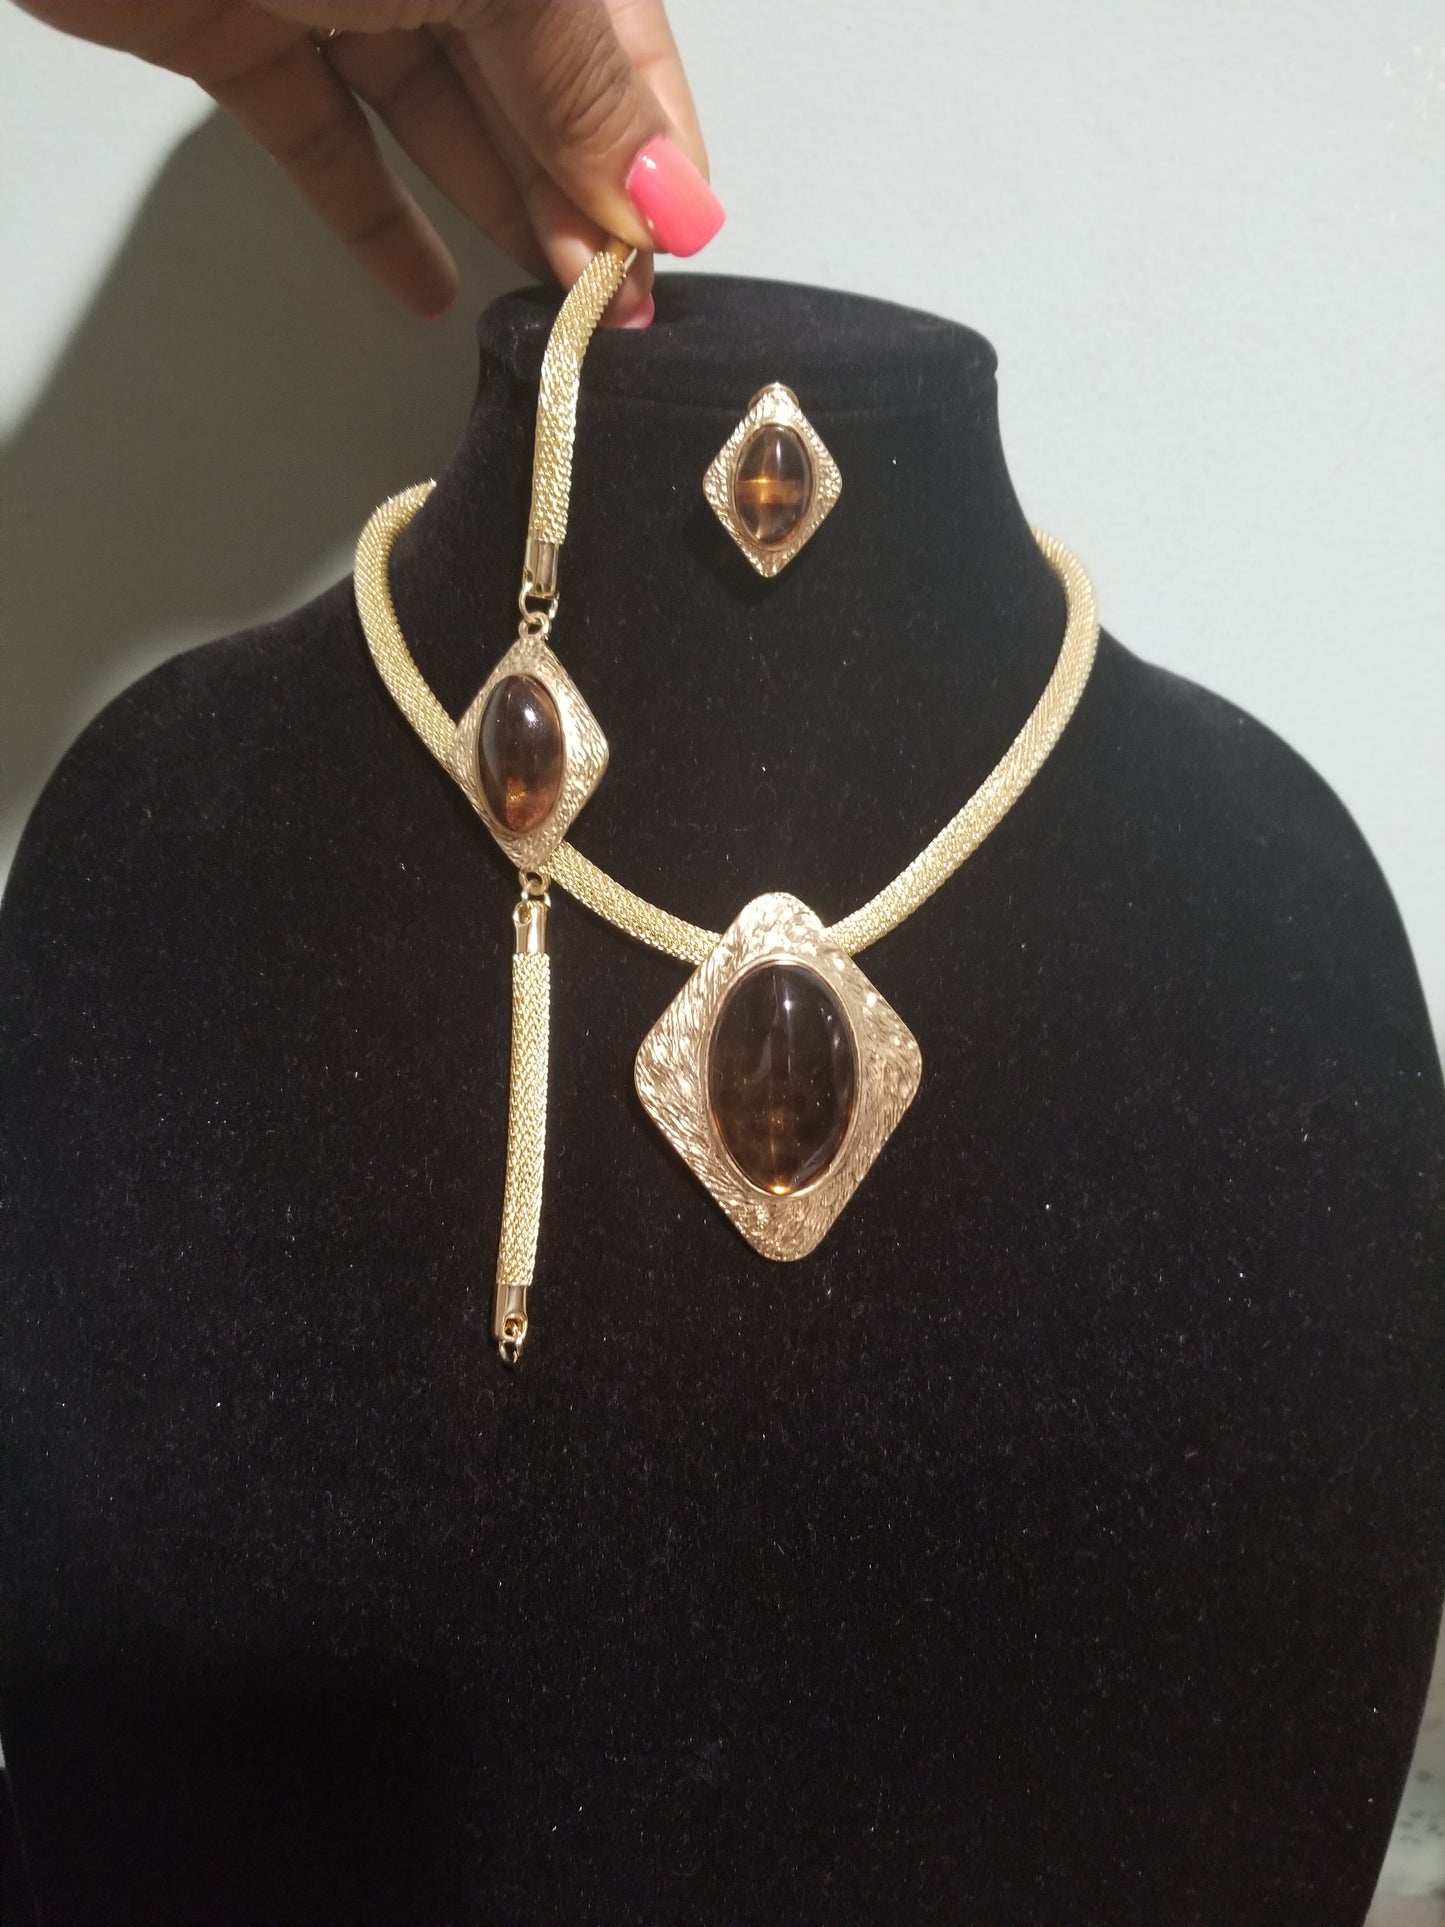 Clearance: 18k high quality Gold plating Dubai Jewelry set. Beautiful brown stone settings. 3piece necklace, earrings, bracelet matching set. African party Jewelry set. Quality, hypoallergenic plating